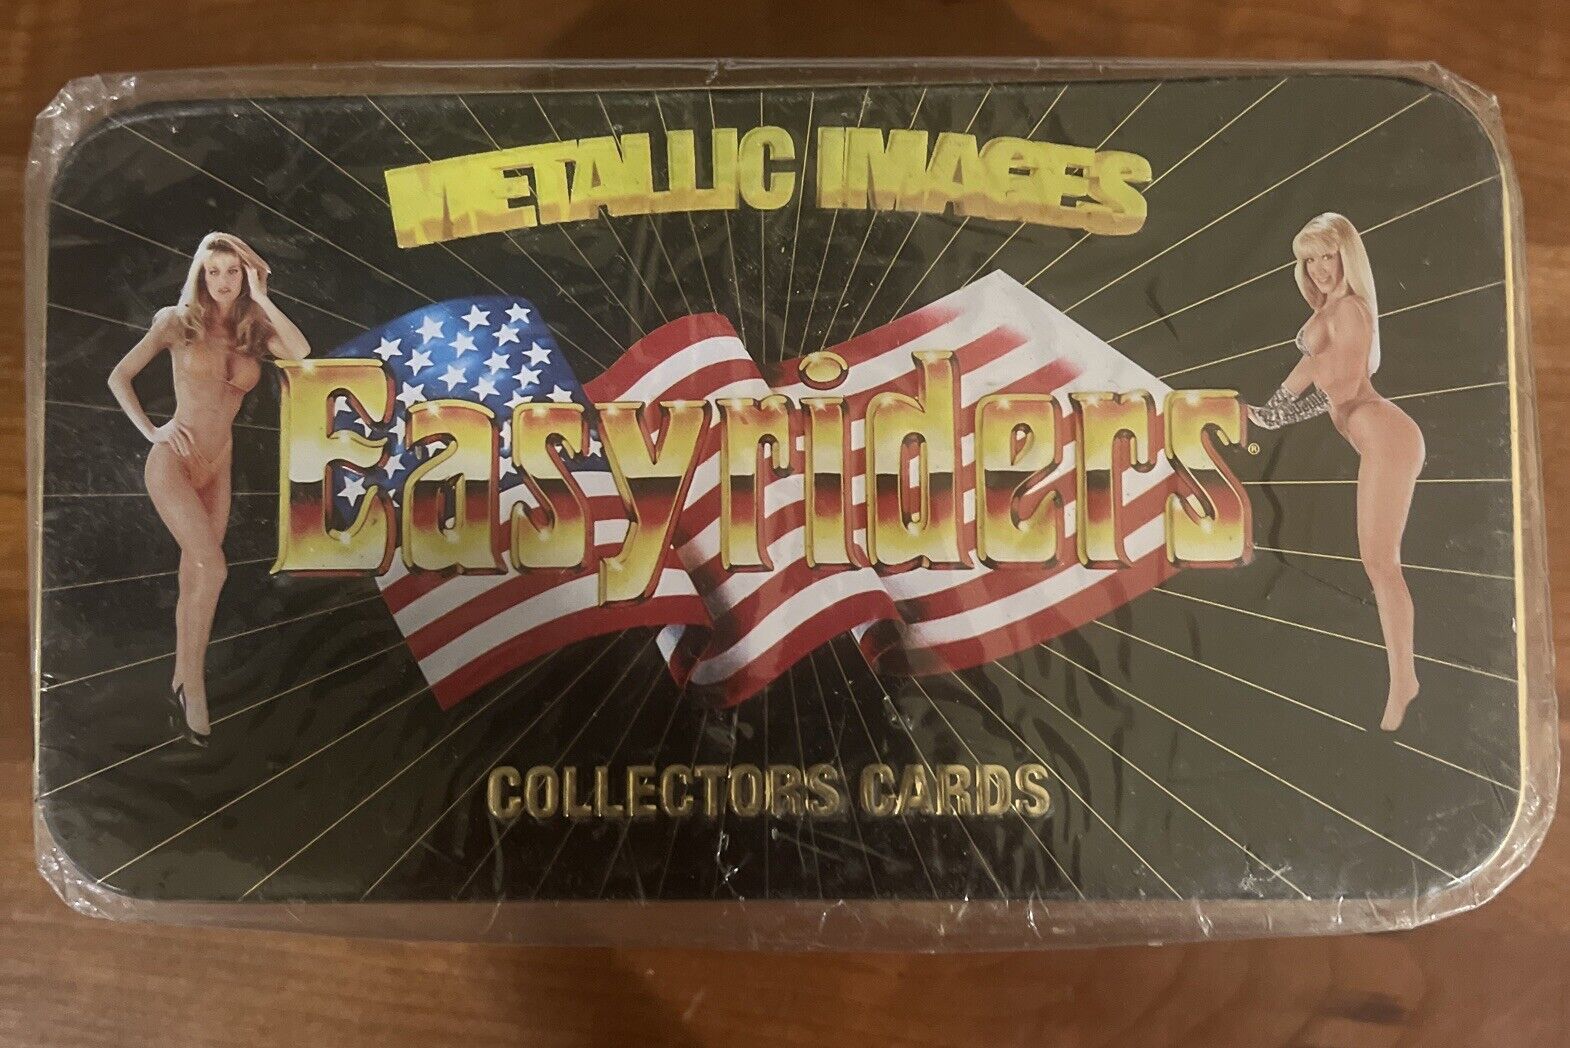 Easyriders Trading Cards Metallic Images Set Series box Vintage Limited Edition